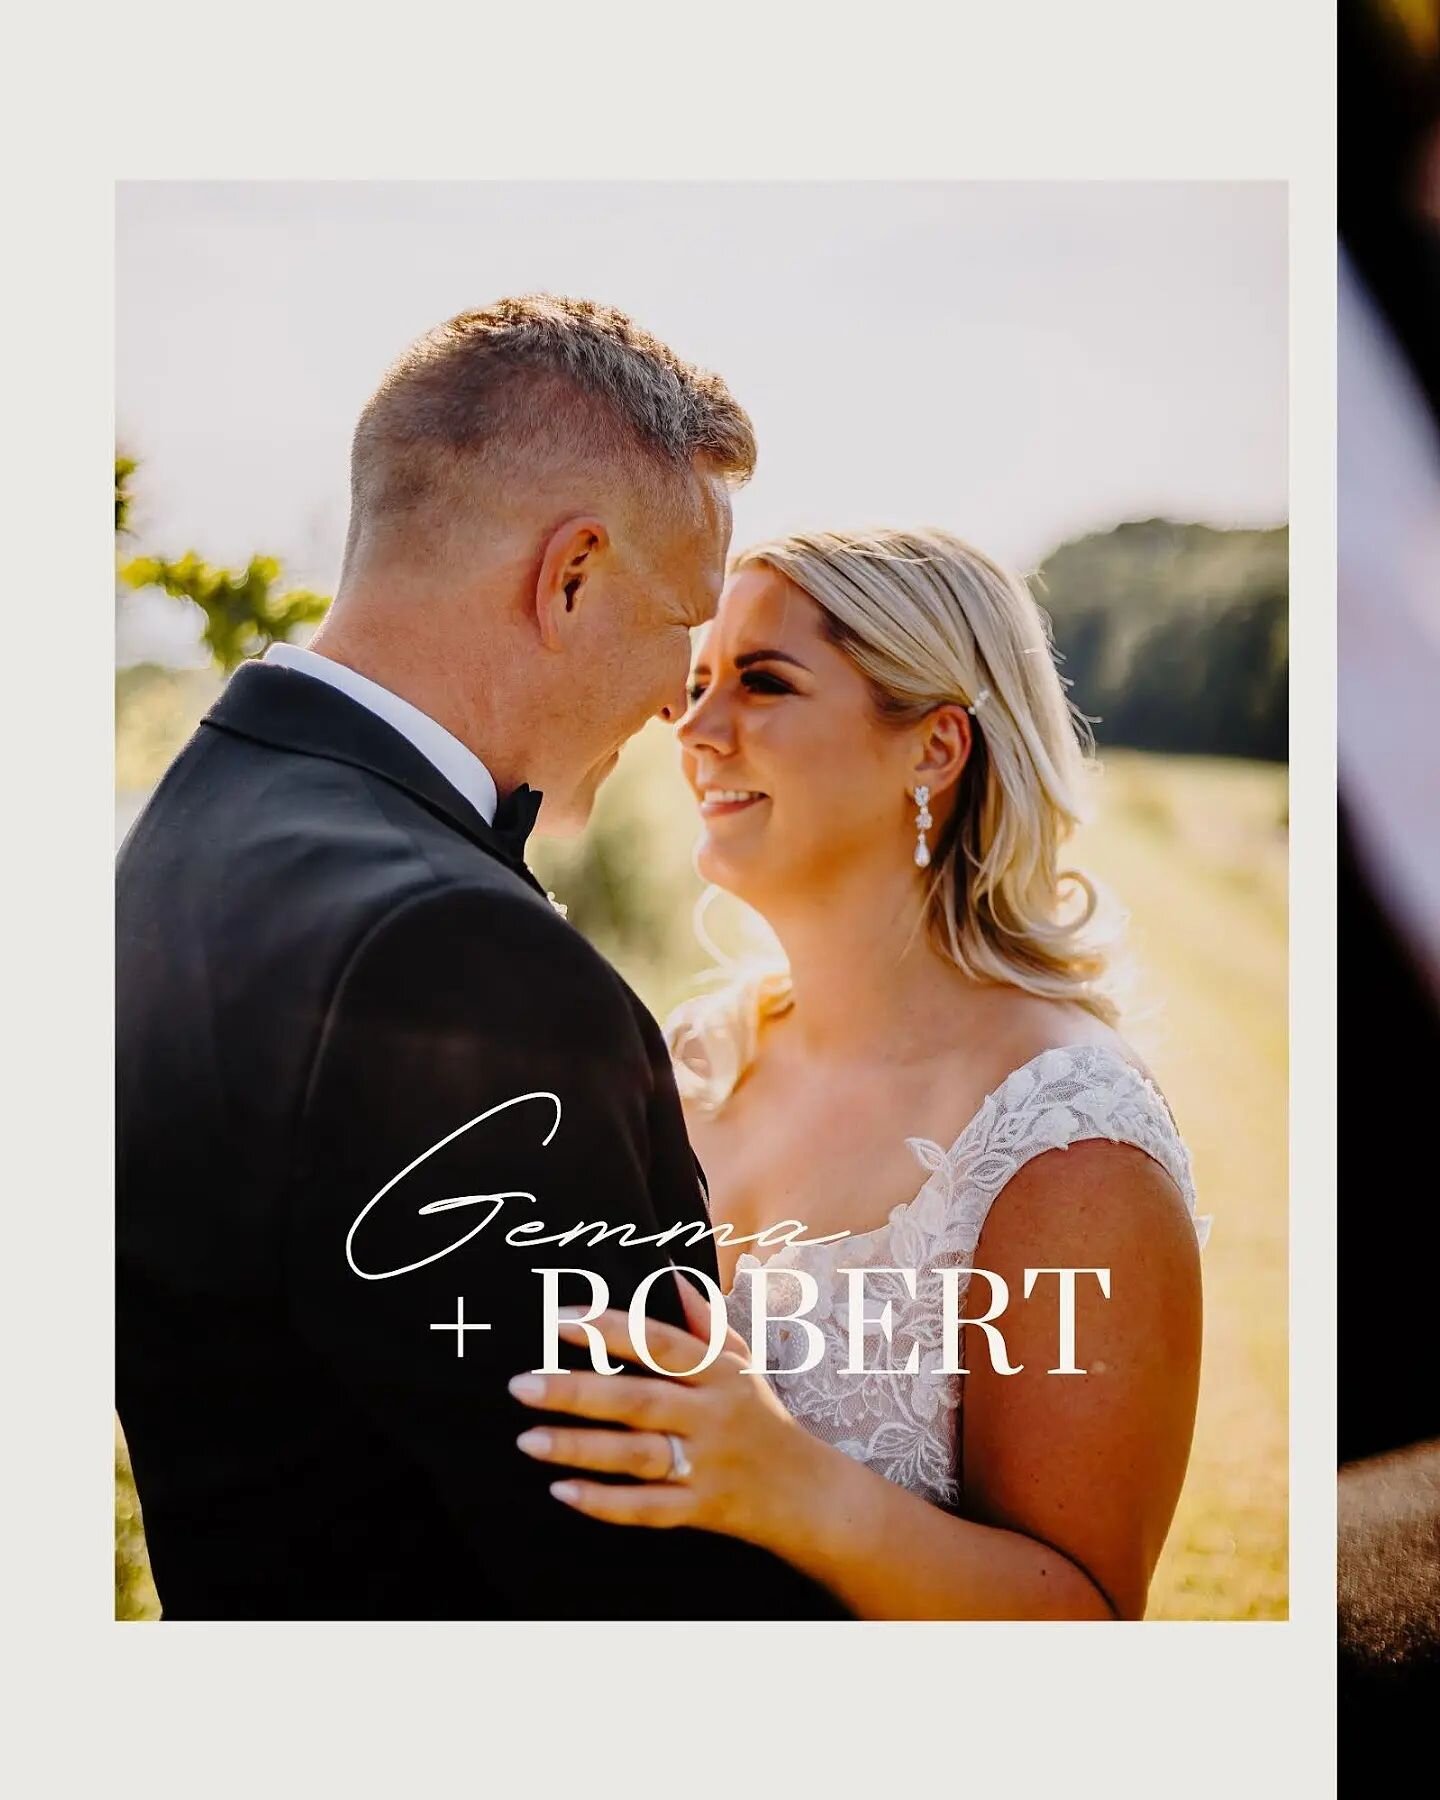 &quot;Thank you for capturing our day so perfectly! ✨&quot; ~ Gemma &amp; Robert

Photography @constancedoylephotography
Venue @tiptopvenues_
Dress @justinalexander @lucyhartbridal 
Suit @mossbros
Florist @kate_alexander90
Rings @ernestjonesjewellers